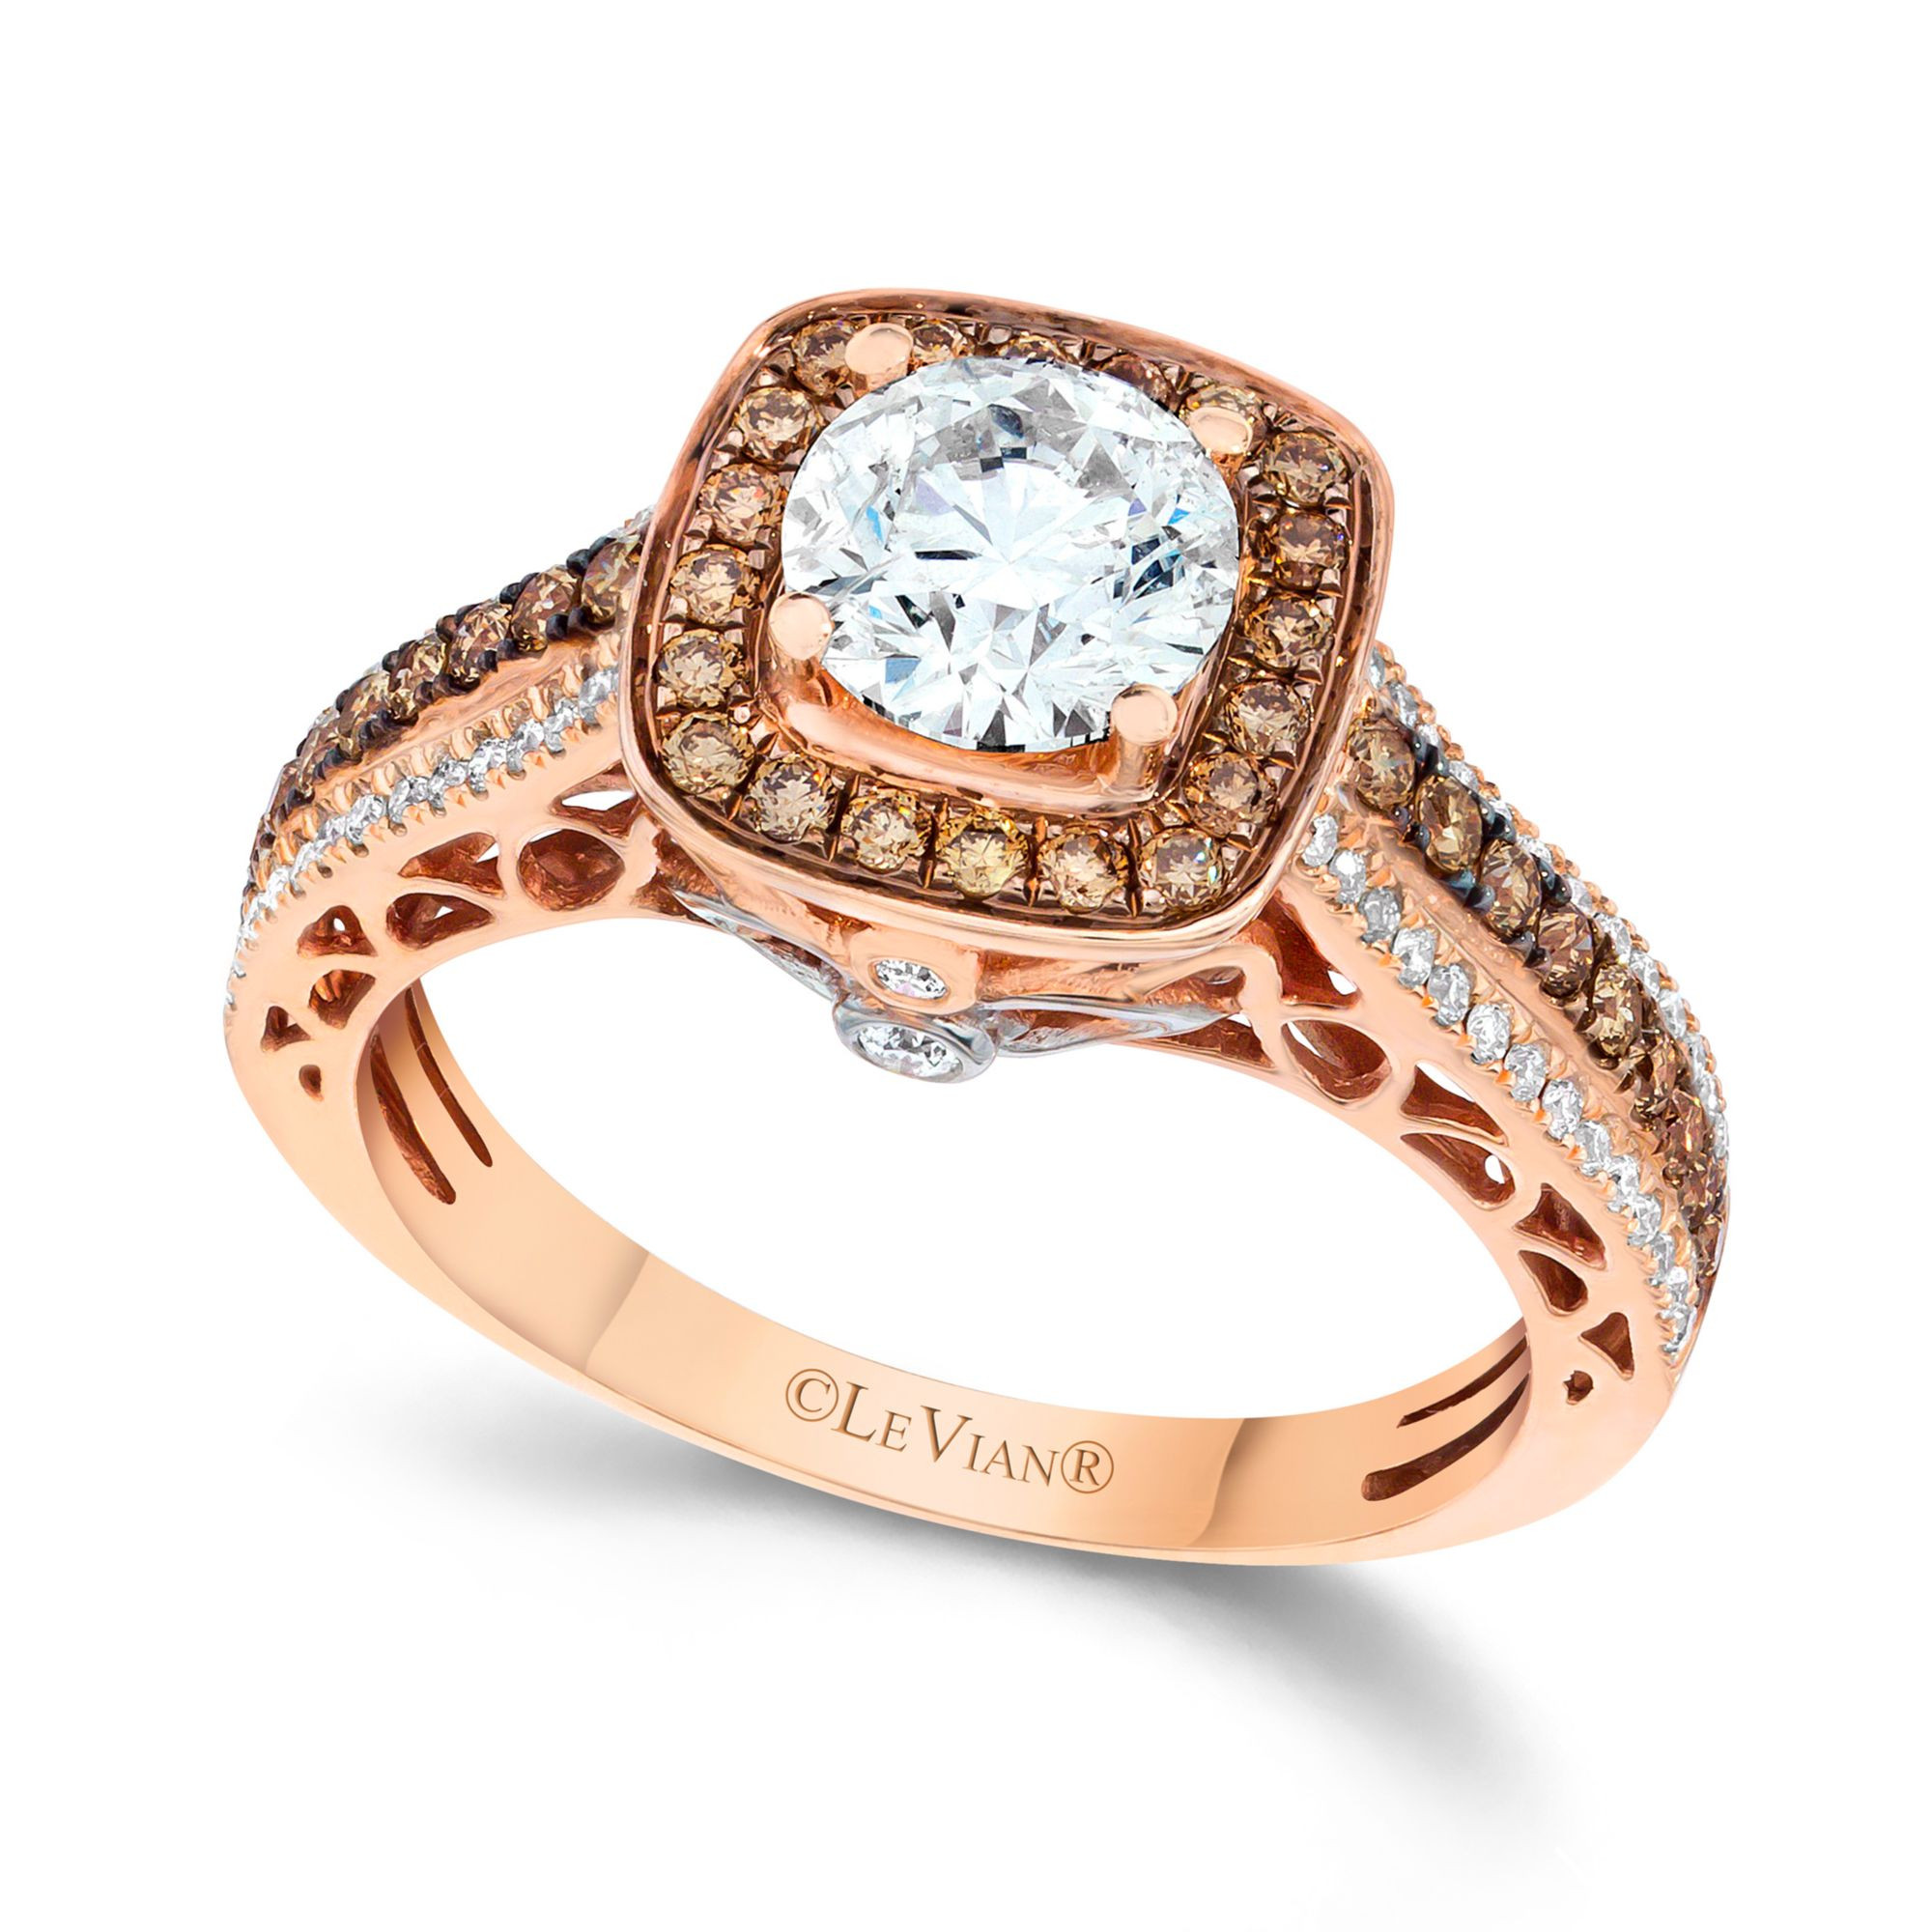 Rose Gold Engagement Rings With Chocolate Diamonds
 Le vian Chocolate and White Diamond Engagement Ring in 14k